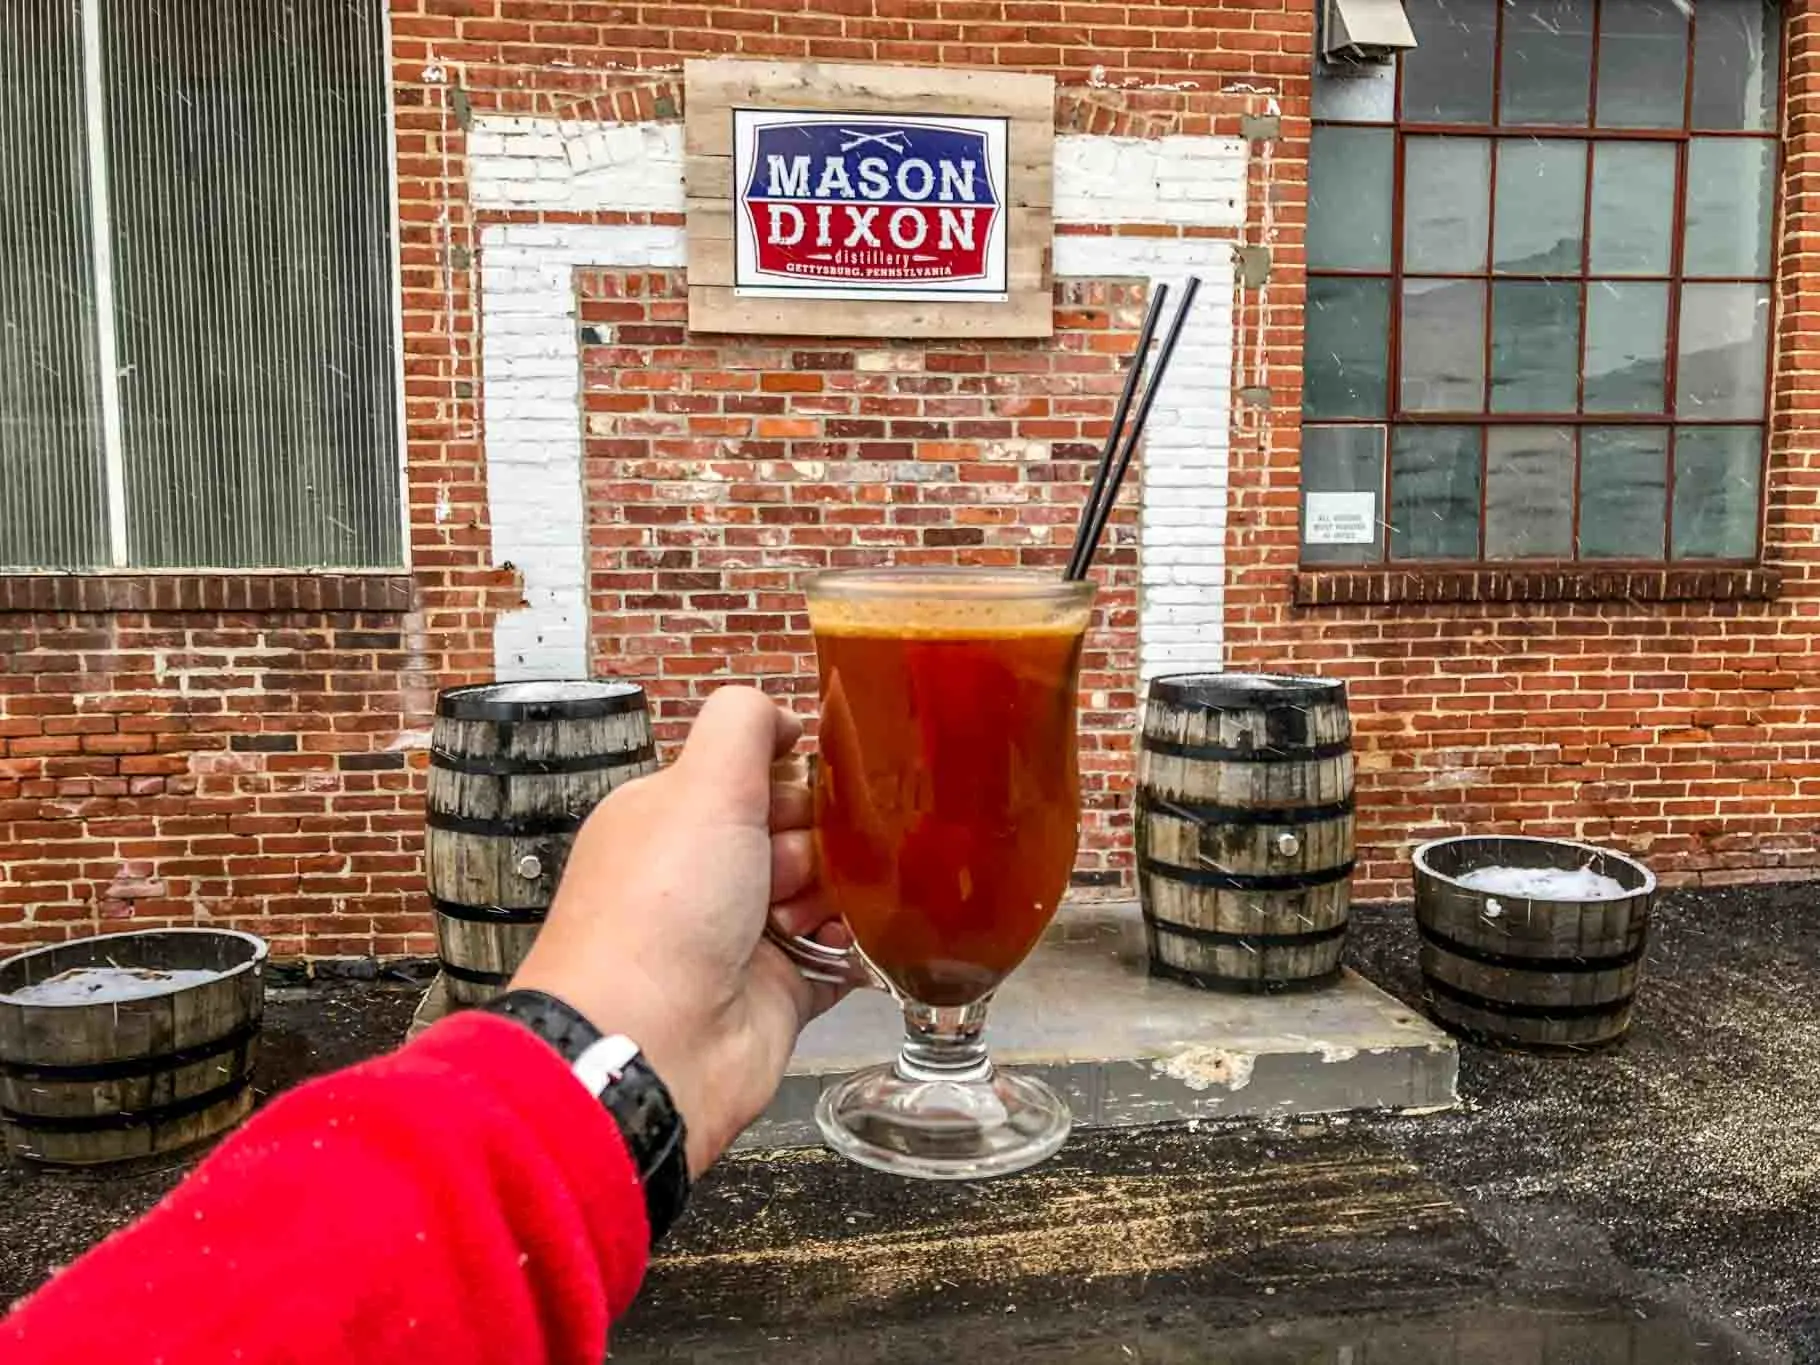 Cocktail in front of sign for Mason Dixon Distillery in Gettysburg, Pennsylvania